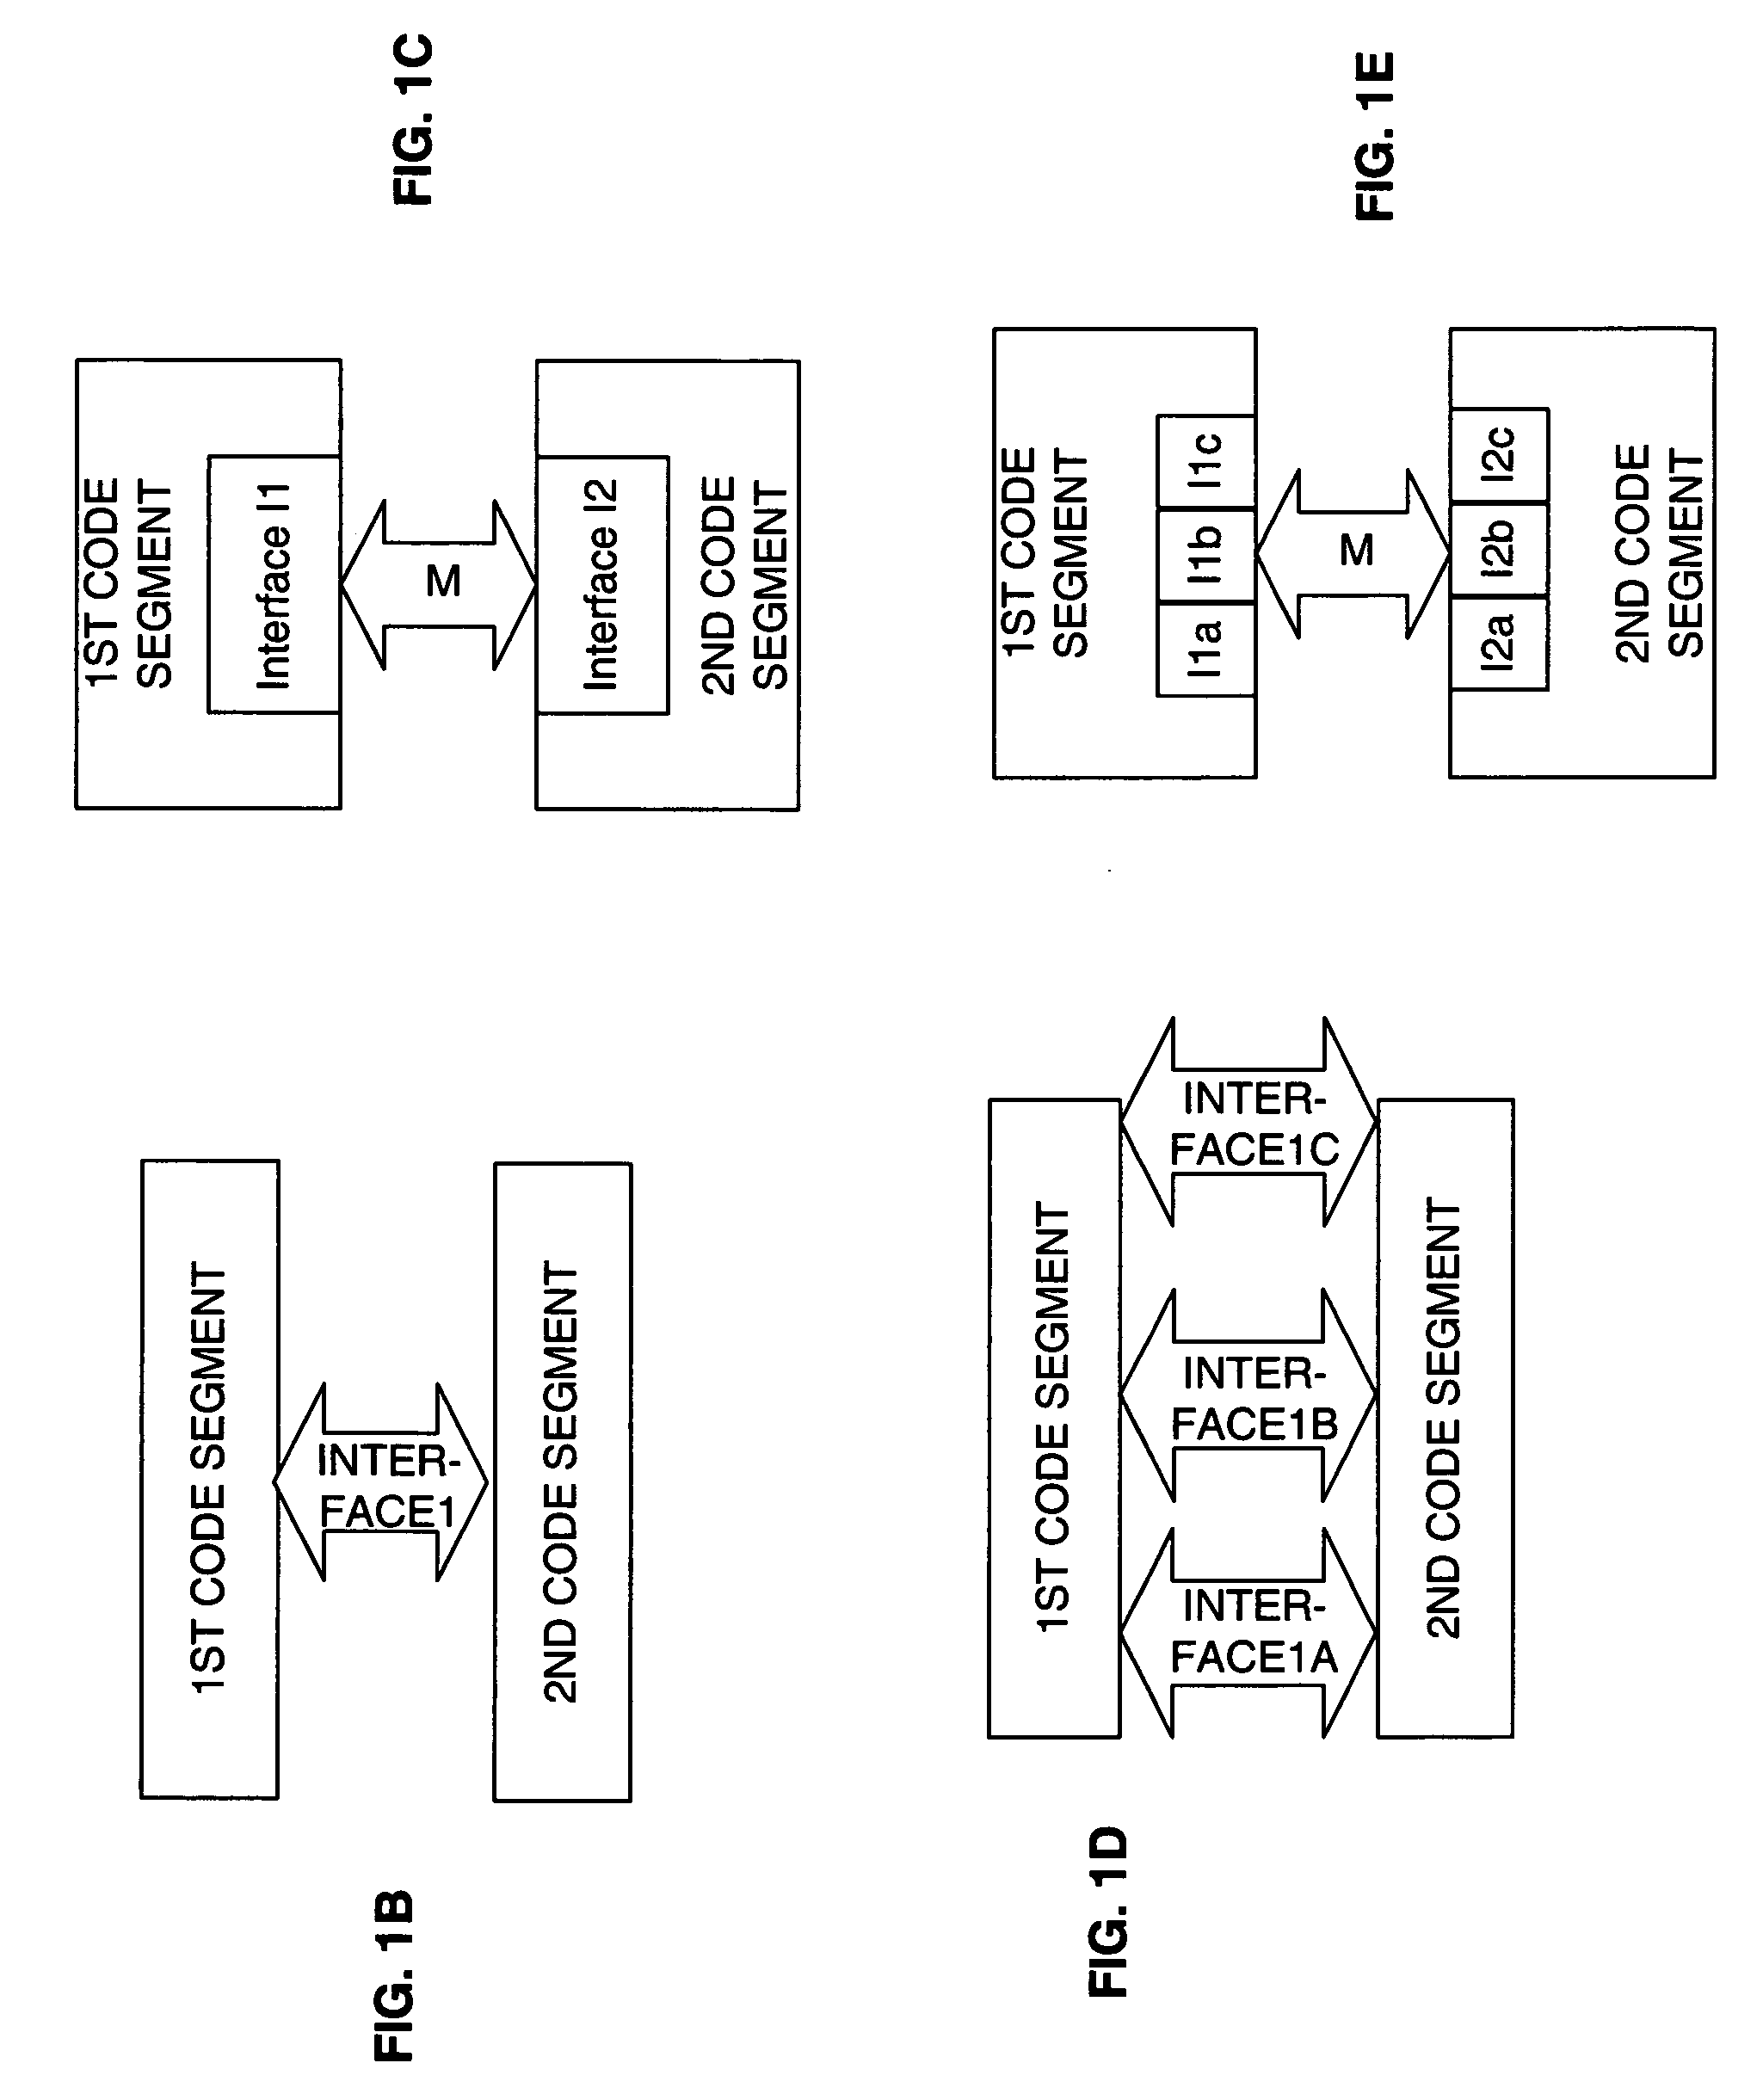 Dialog user interfaces for related tasks and programming interface for same